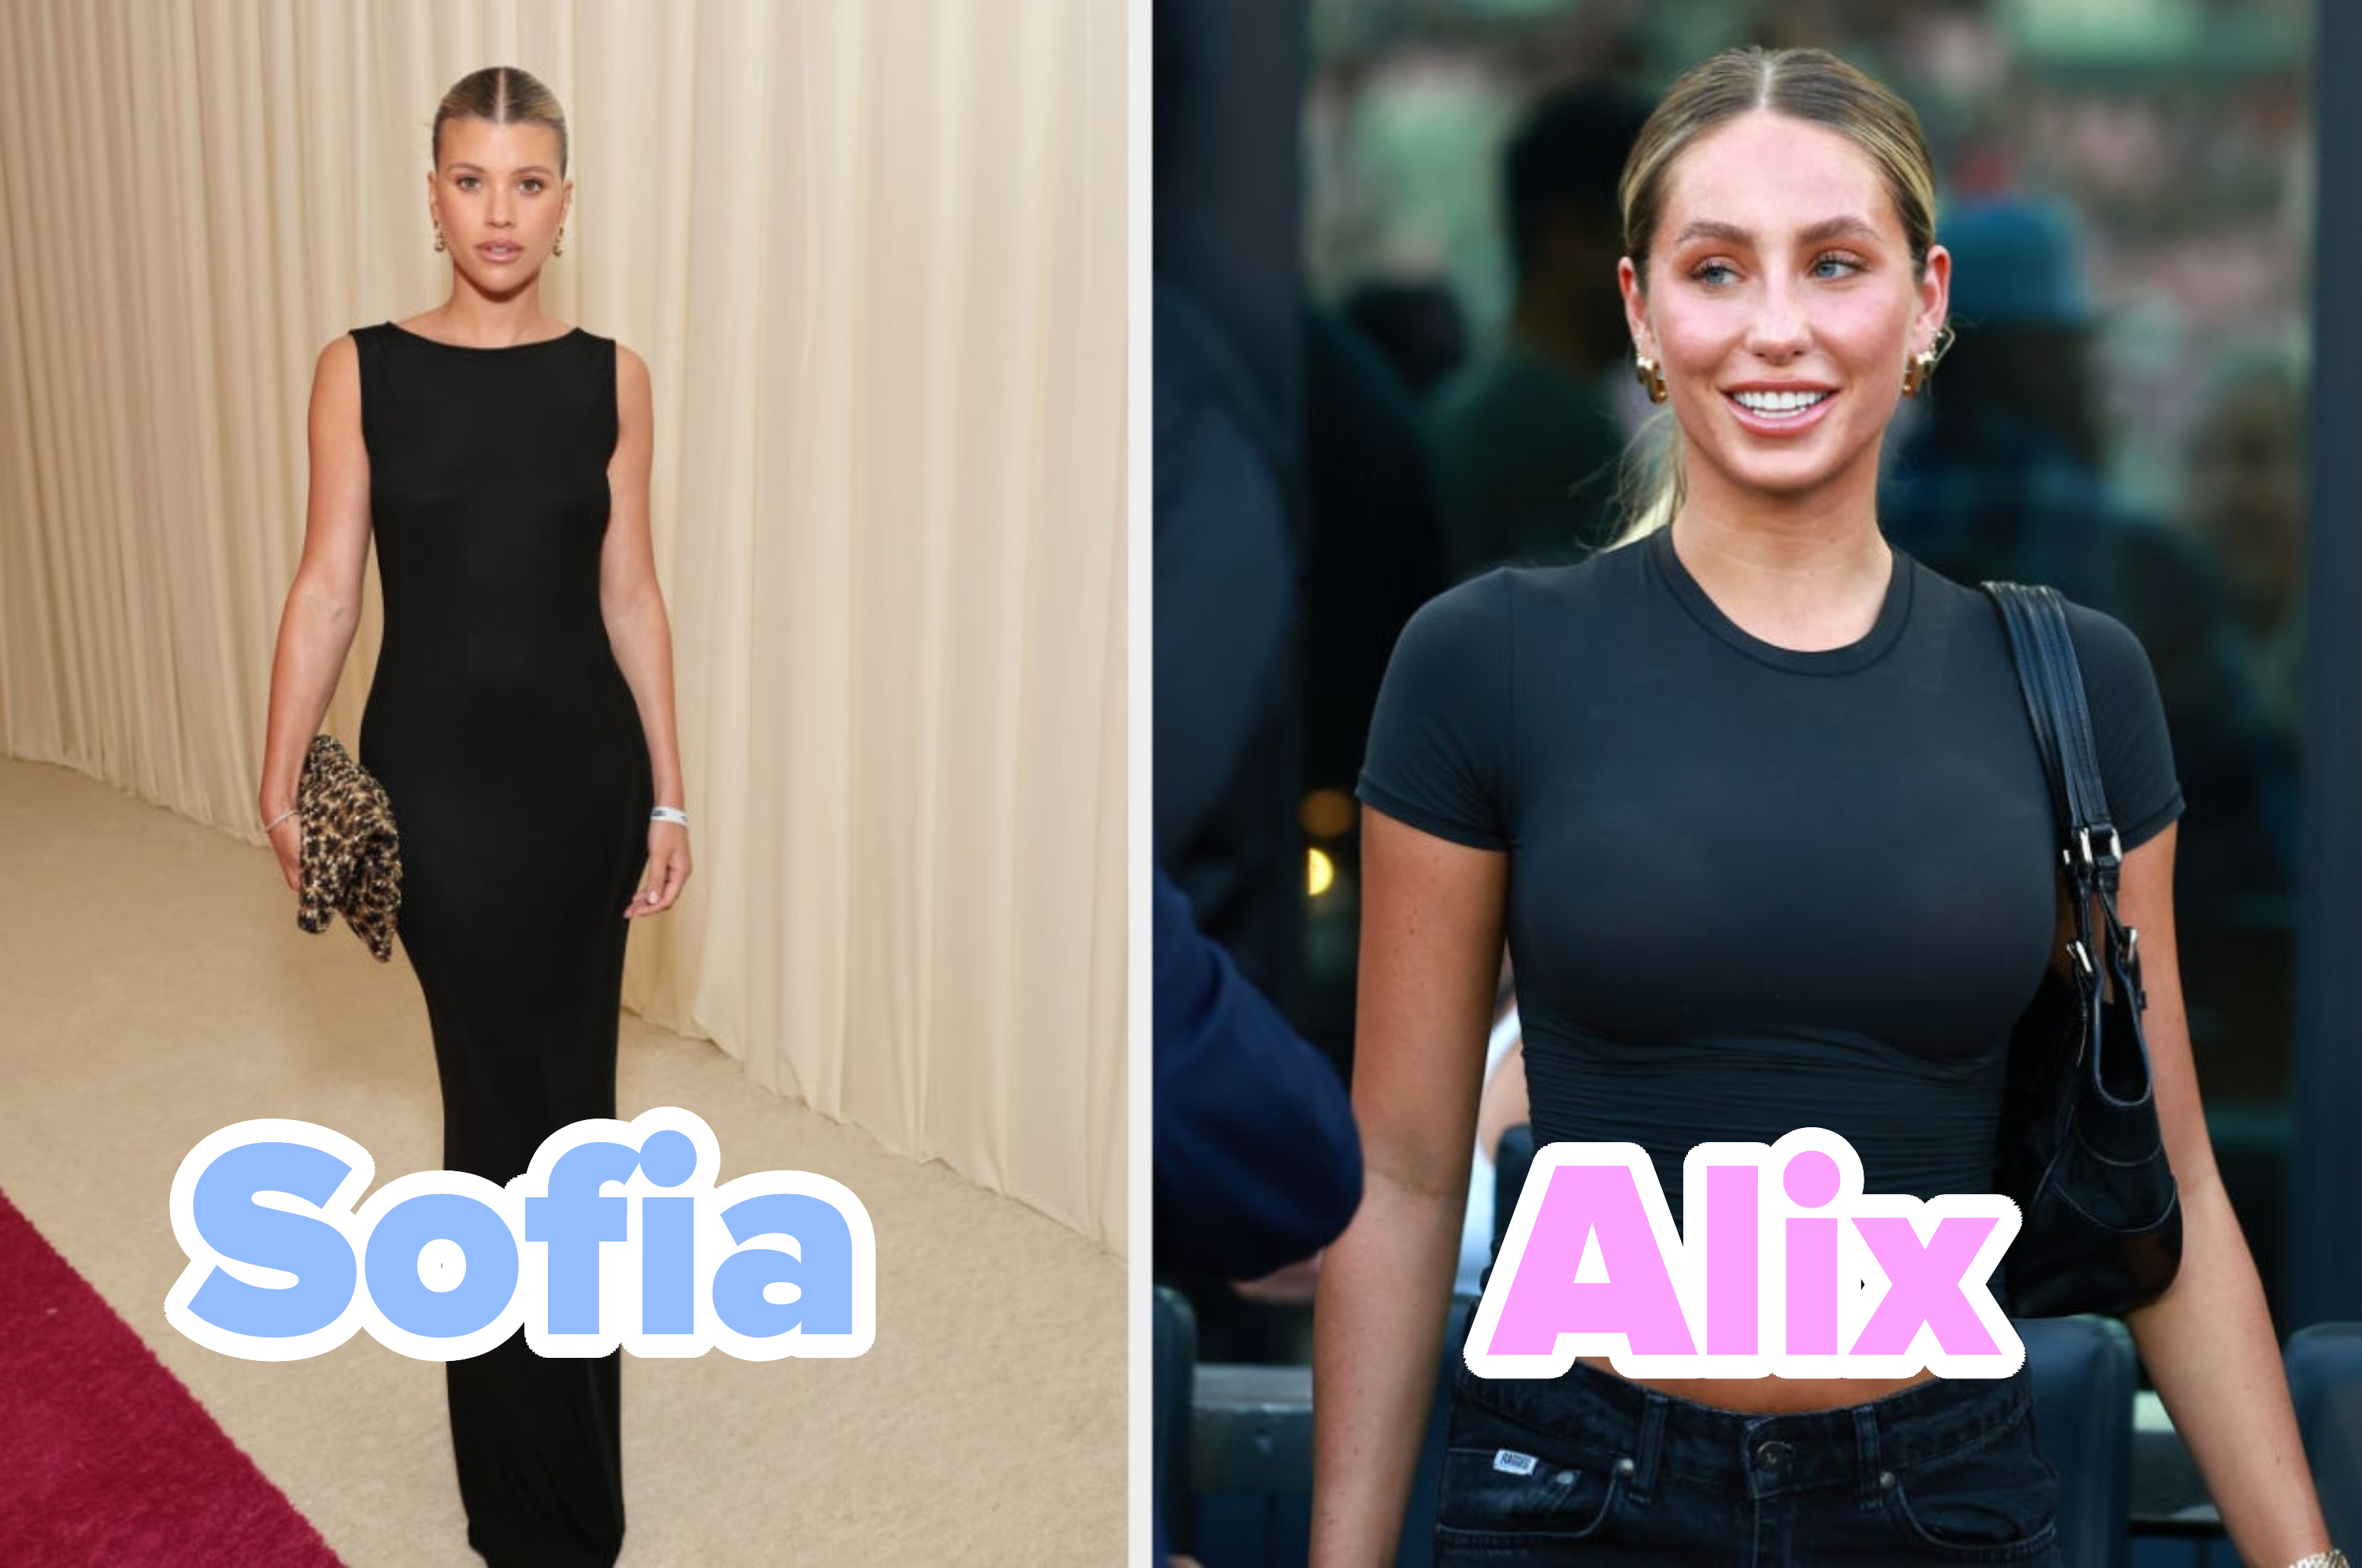 Sofia attending an event in a formal gown and Alix attending an event in a casual outfit